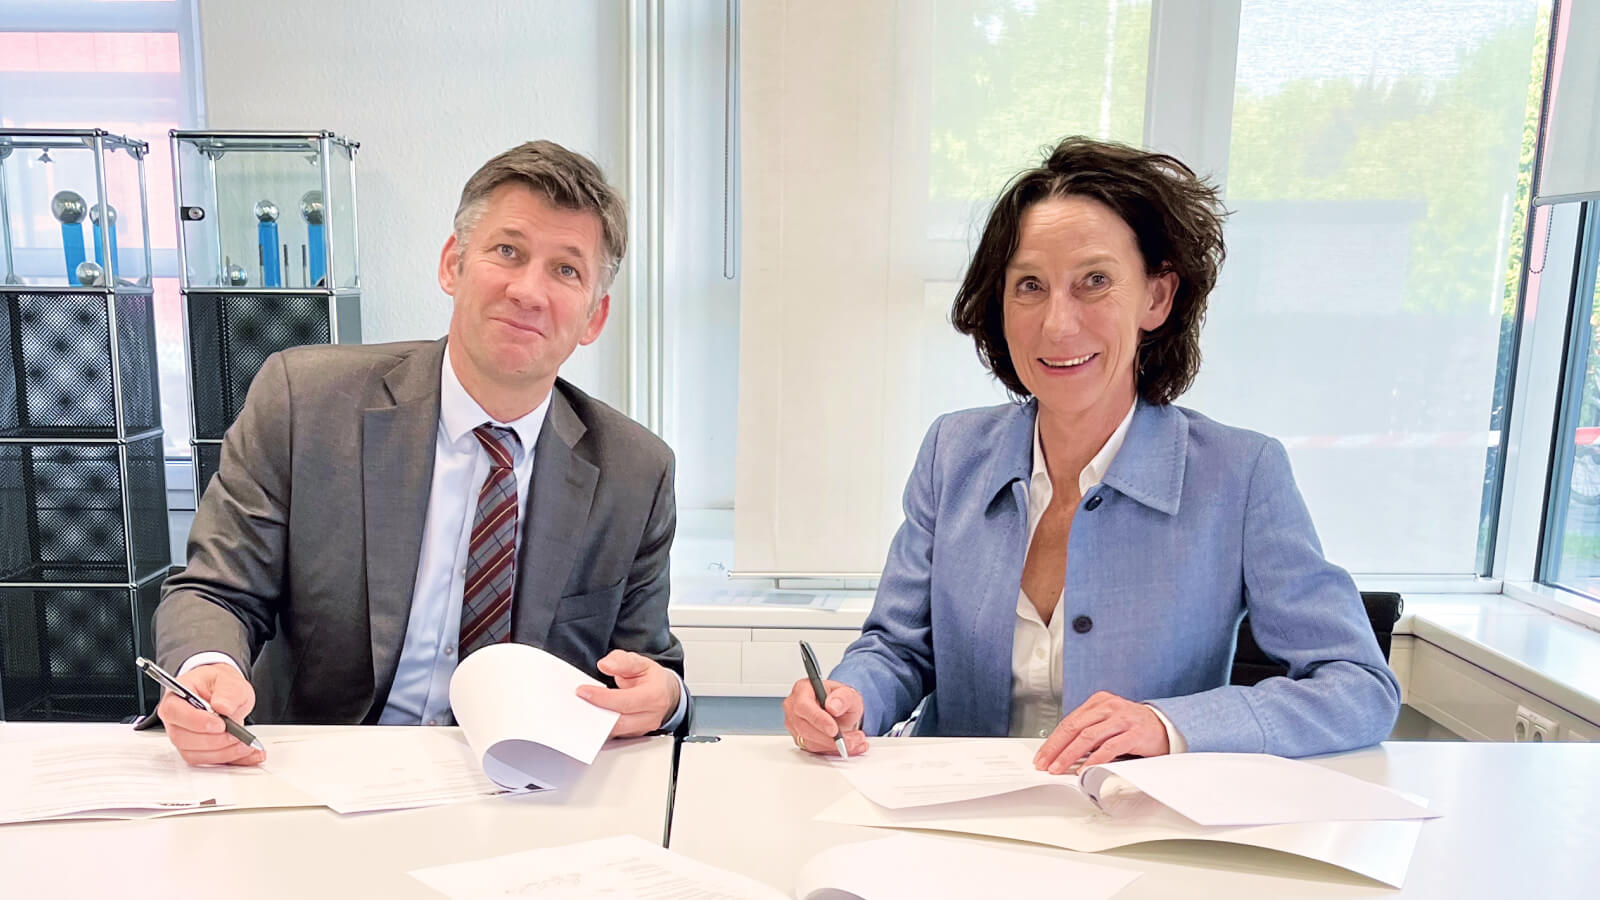 Martin Ripple (left) and Dr.-Ing. Beate Hüttermann (right) sign the cooperation agreement between ANCA and CemeCon